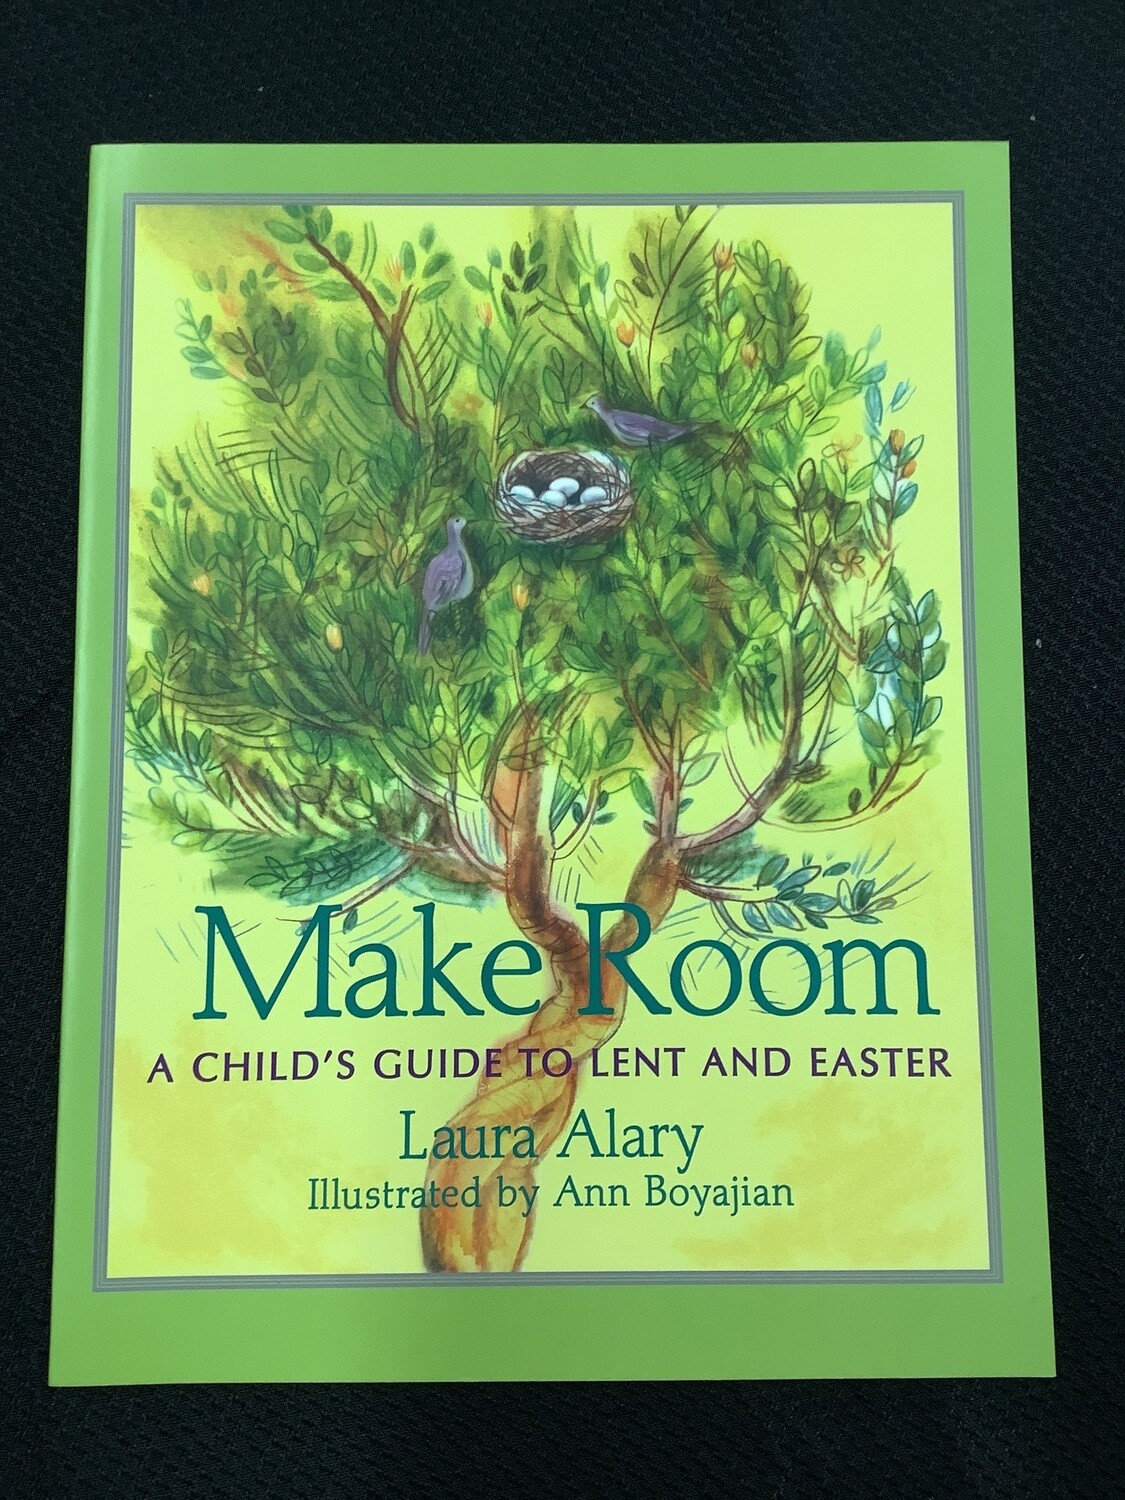 Make Room Child’s Guide To Lent And Easter - Laura Alary, Ann Boyajian